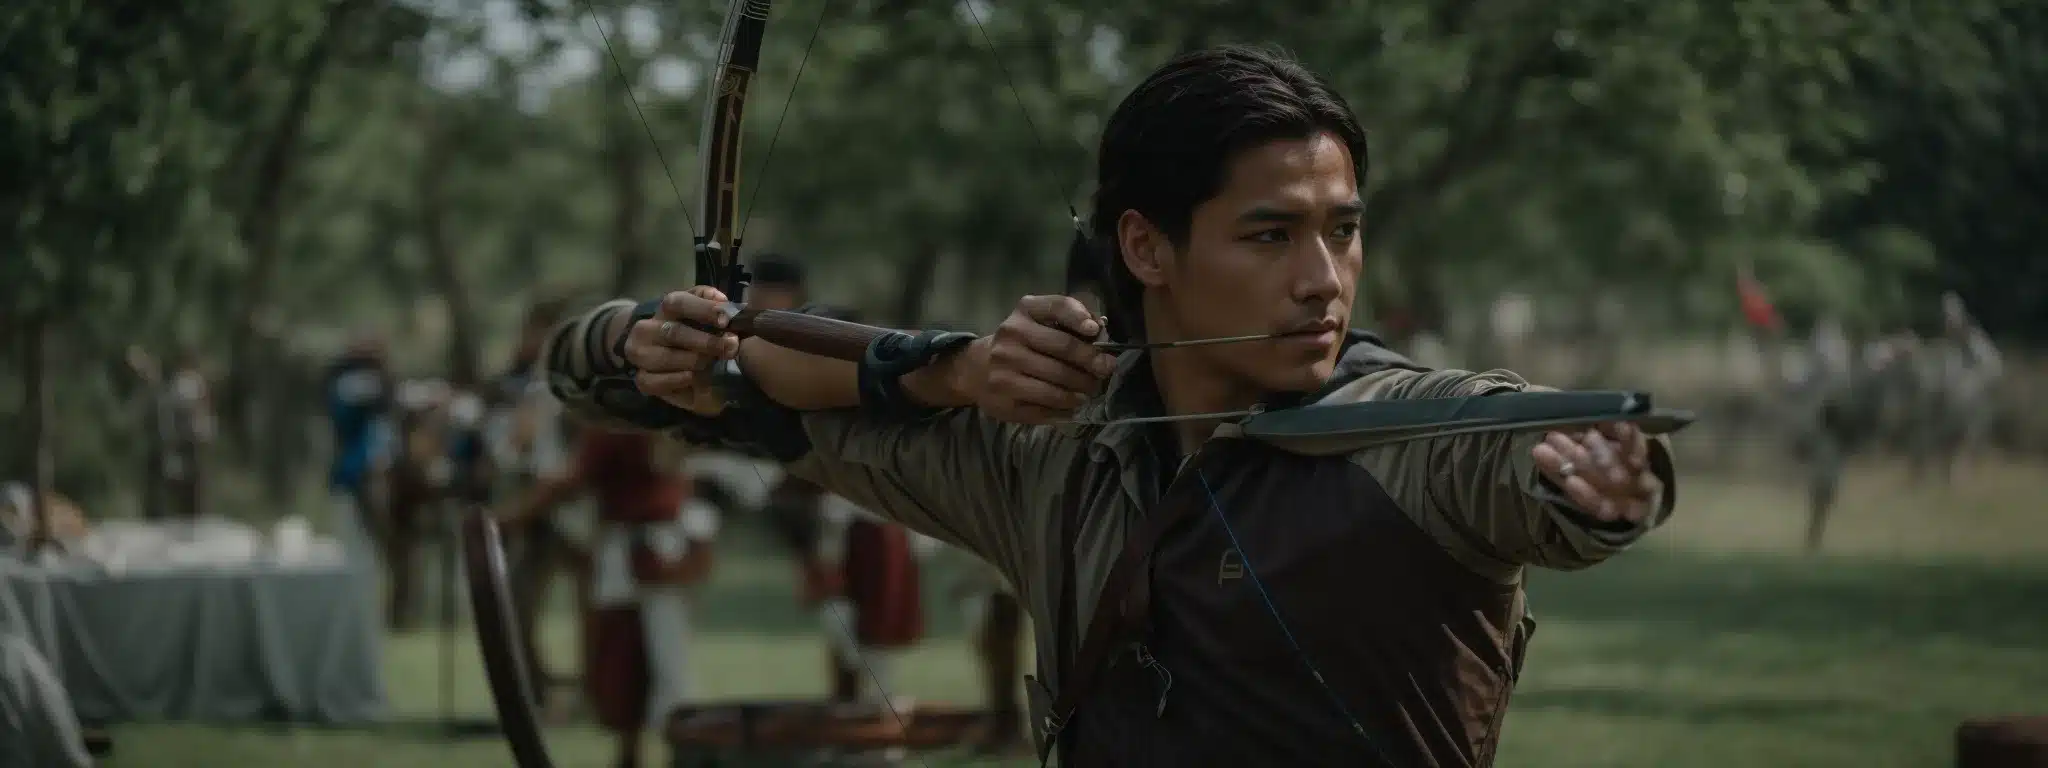 A Focused Archer Aiming An Arrow At A Distant Target.